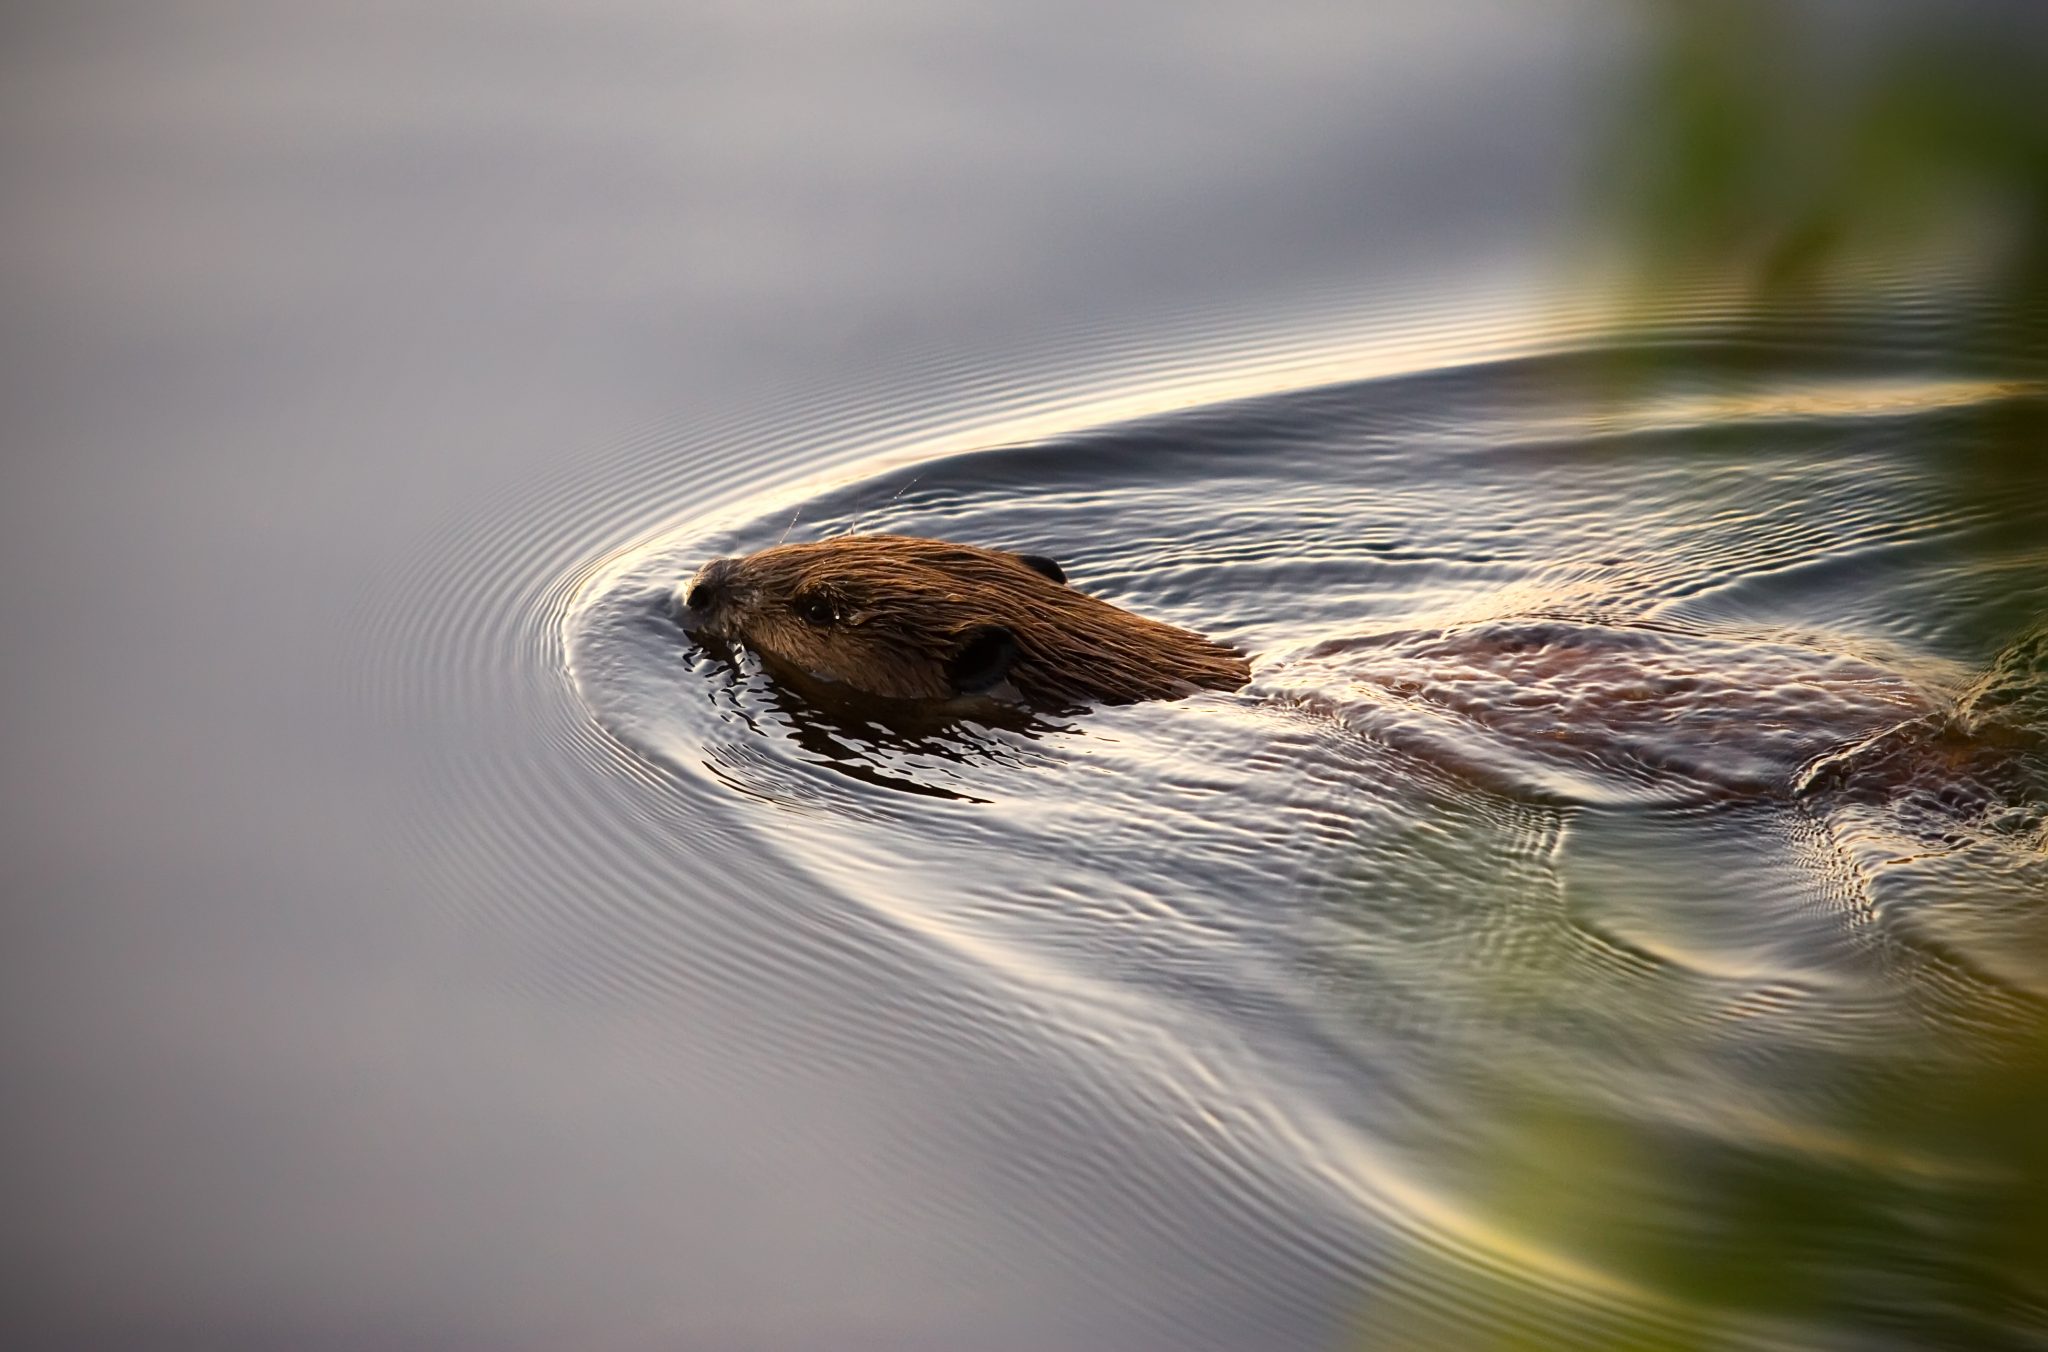 Wild beaver swims through clear water on cool morning.